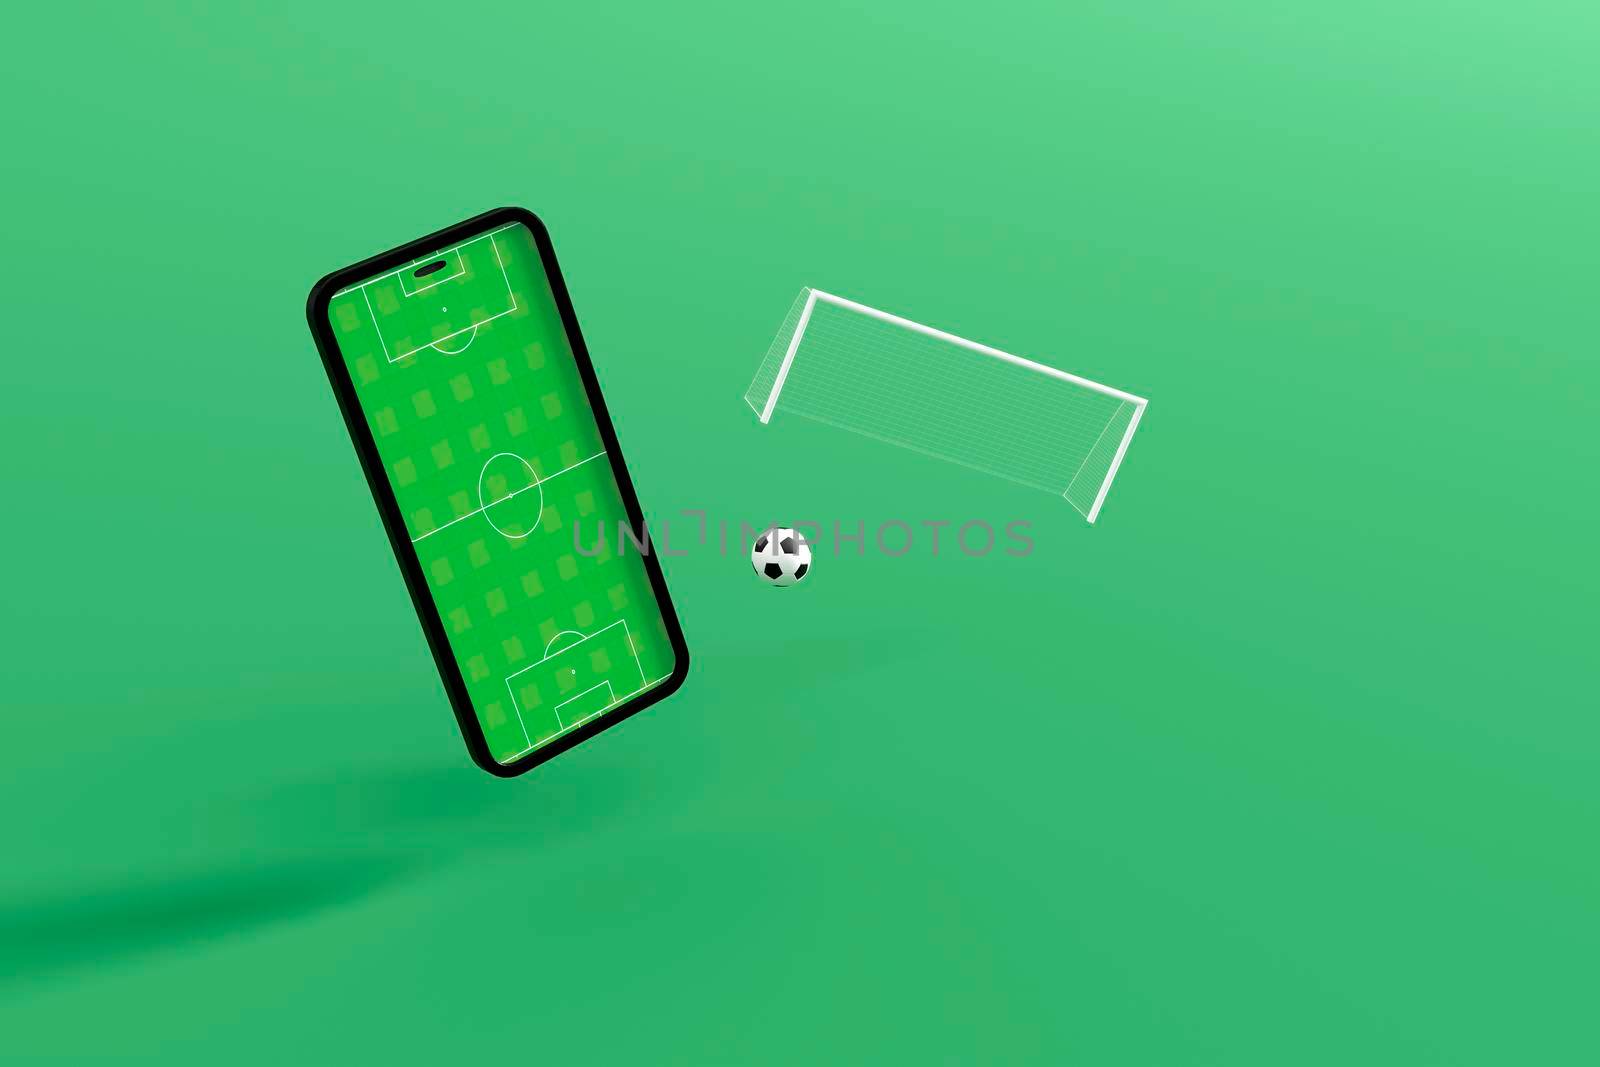 Mobile football soccer. Online sport bet play match. Online soccer game with live mobile app. Football field on the smartphone screen and ball. Online ticket sales, sport betting concept. 3d illustration